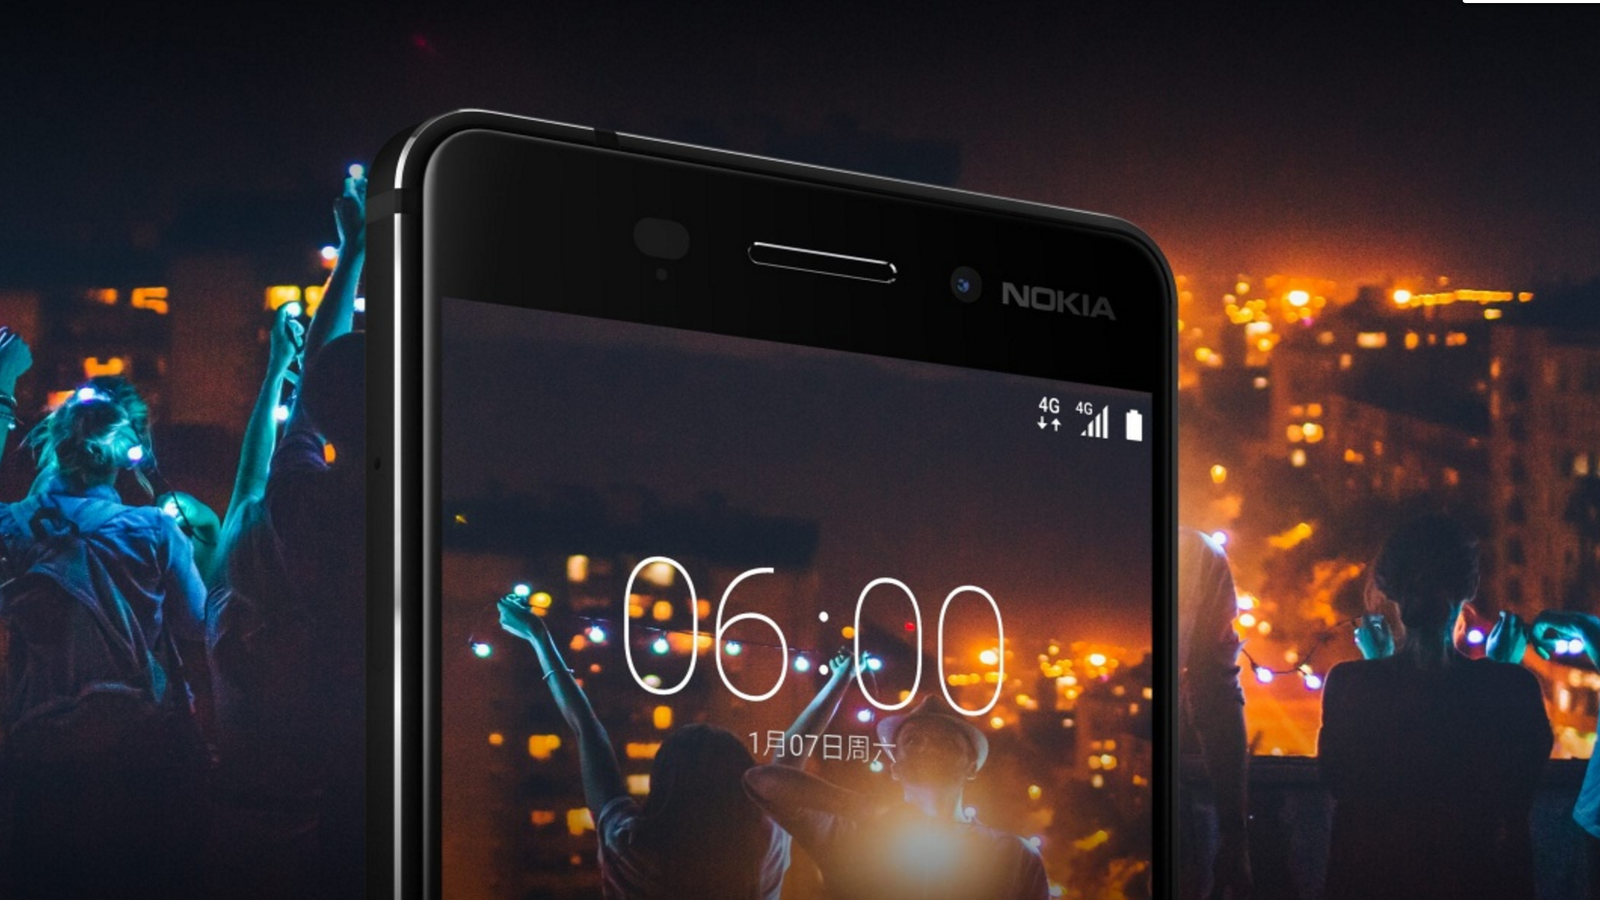 Nokia promises two years of updates for Nokia 3, 5 and 6